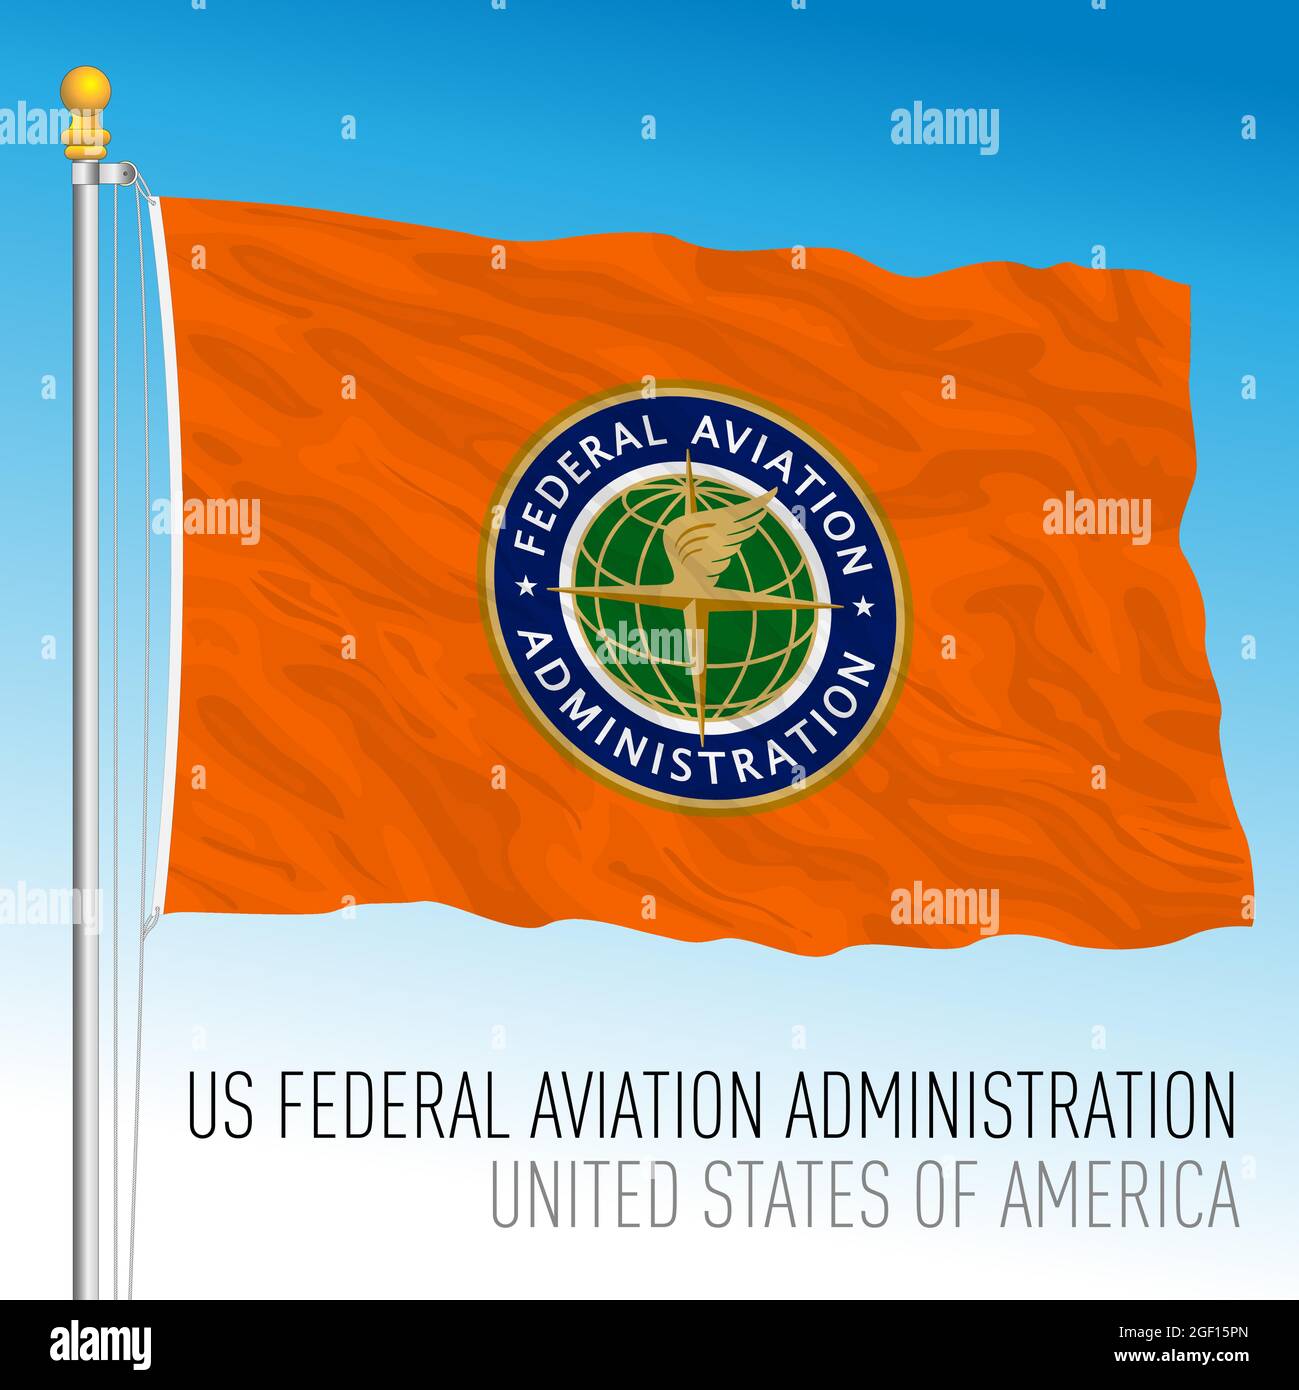 US Federal Aviation Administration flag, United States of America, vector illustration Stock Vector